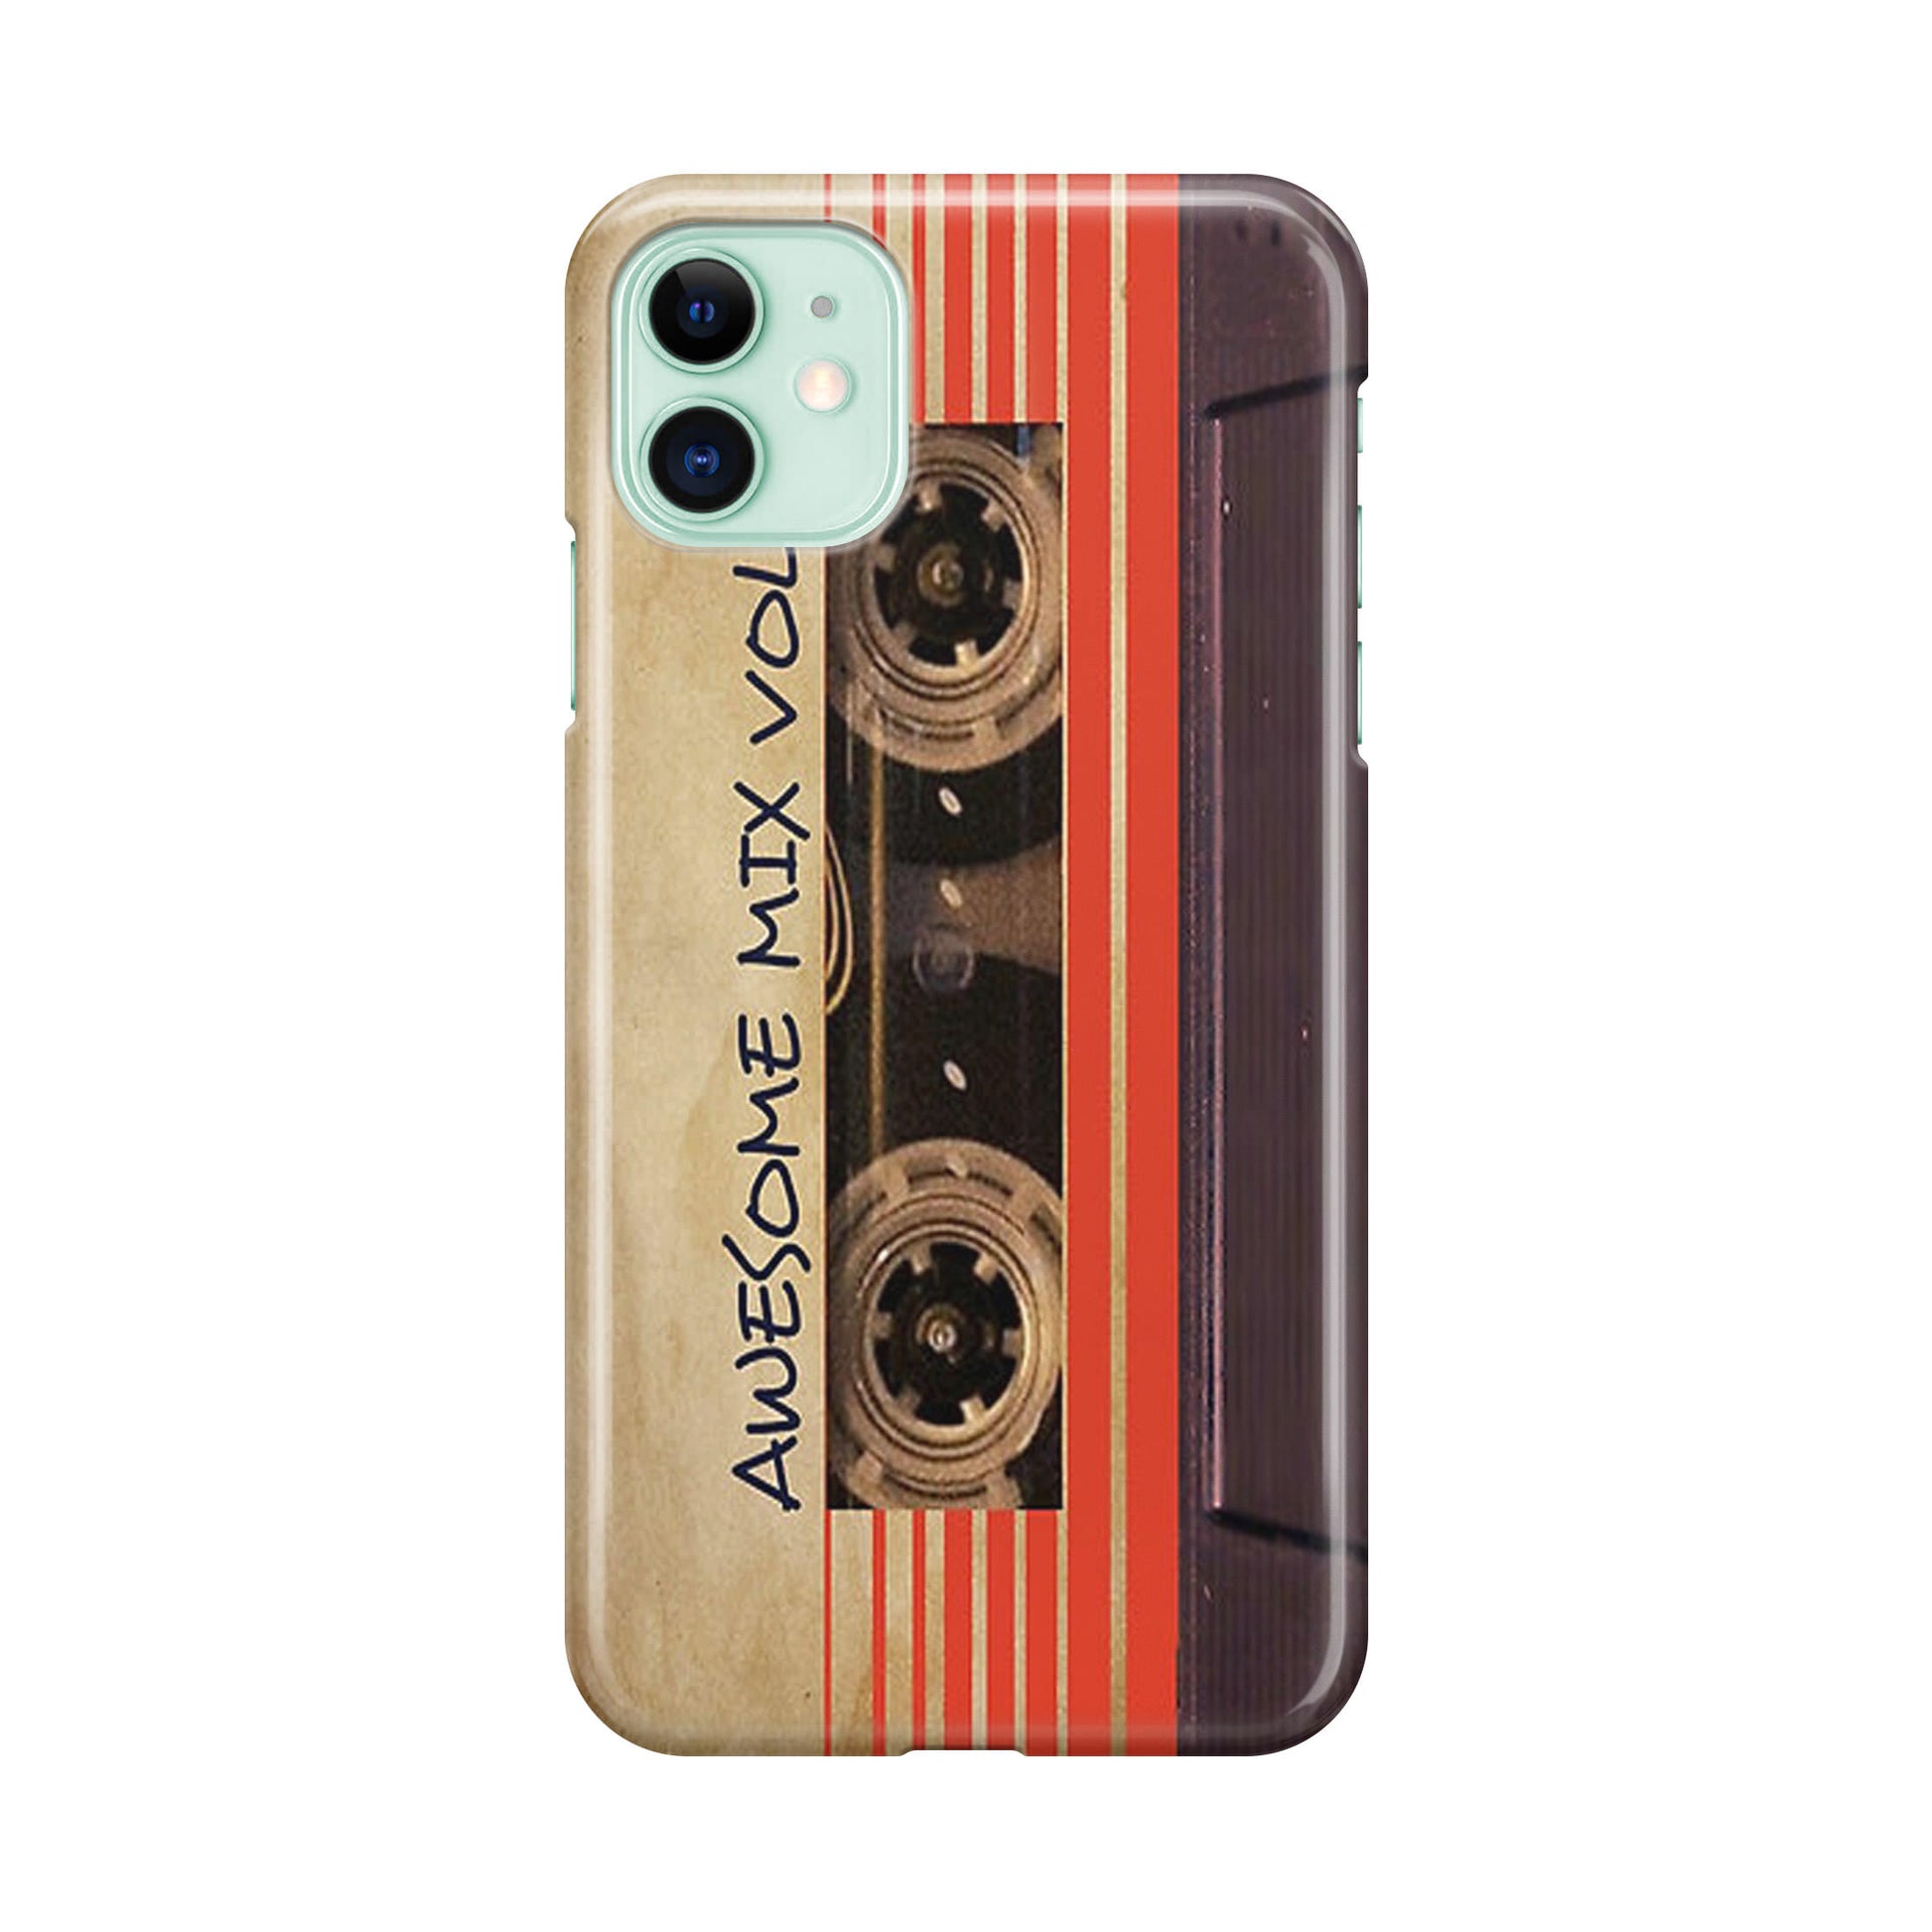 Awesome Mix Vol 1 Cassette iPhone 12 Case